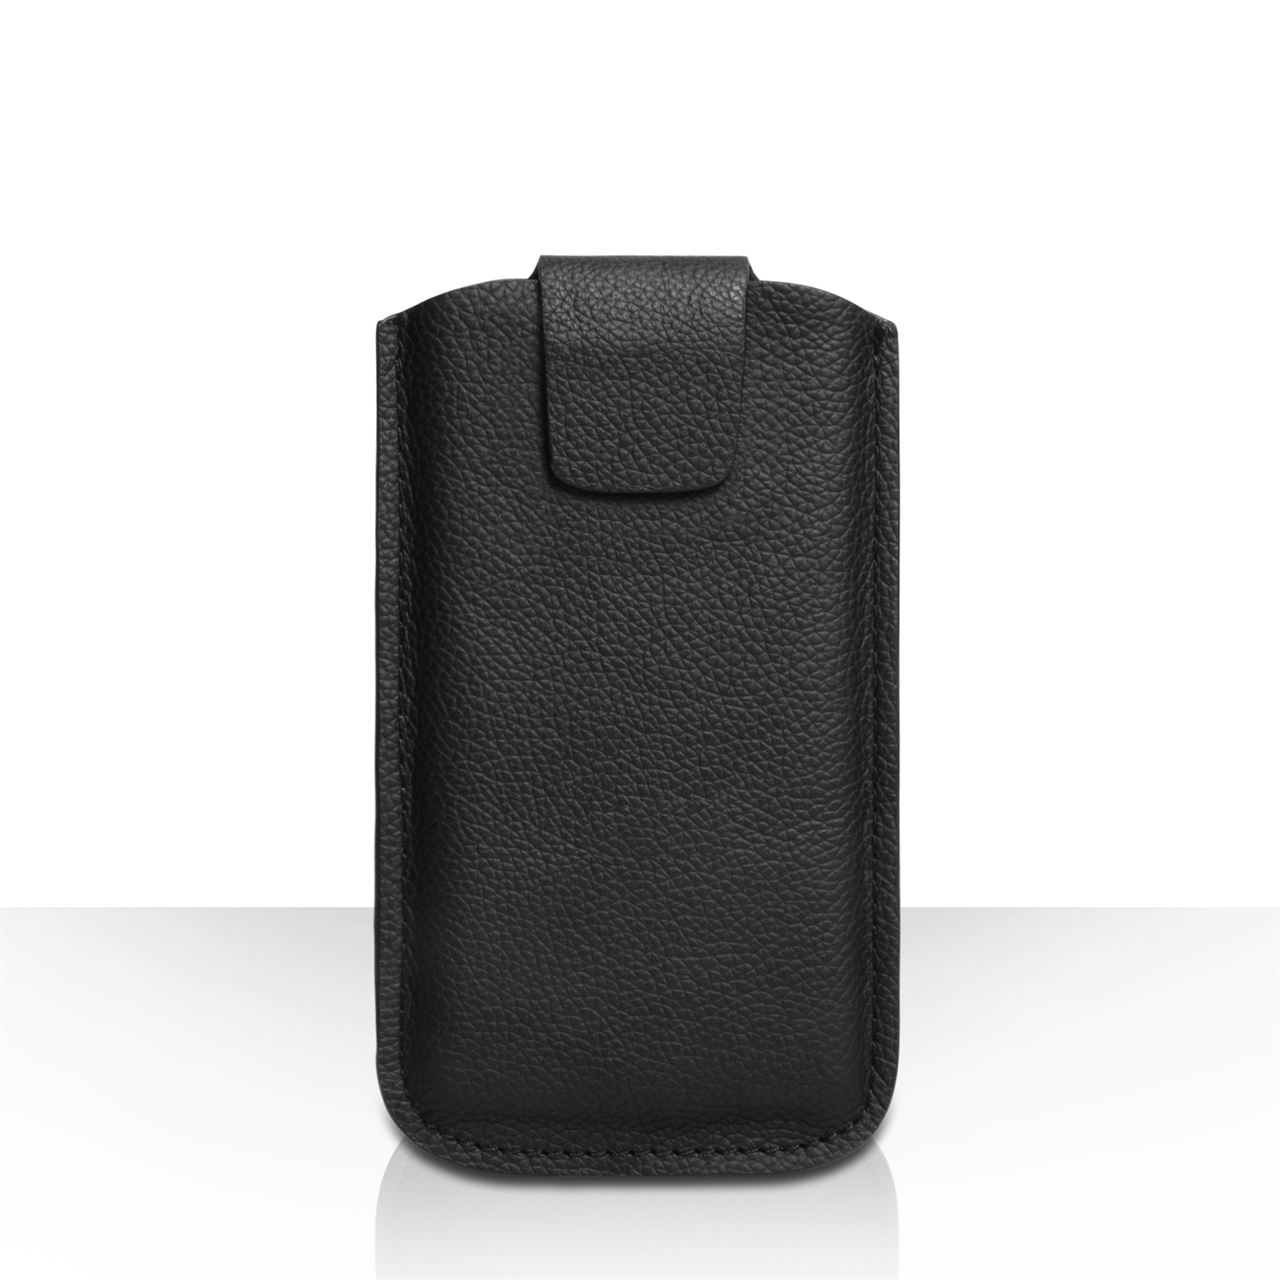 Caseflex Large Real Leather Textured Phone Pouch - Black